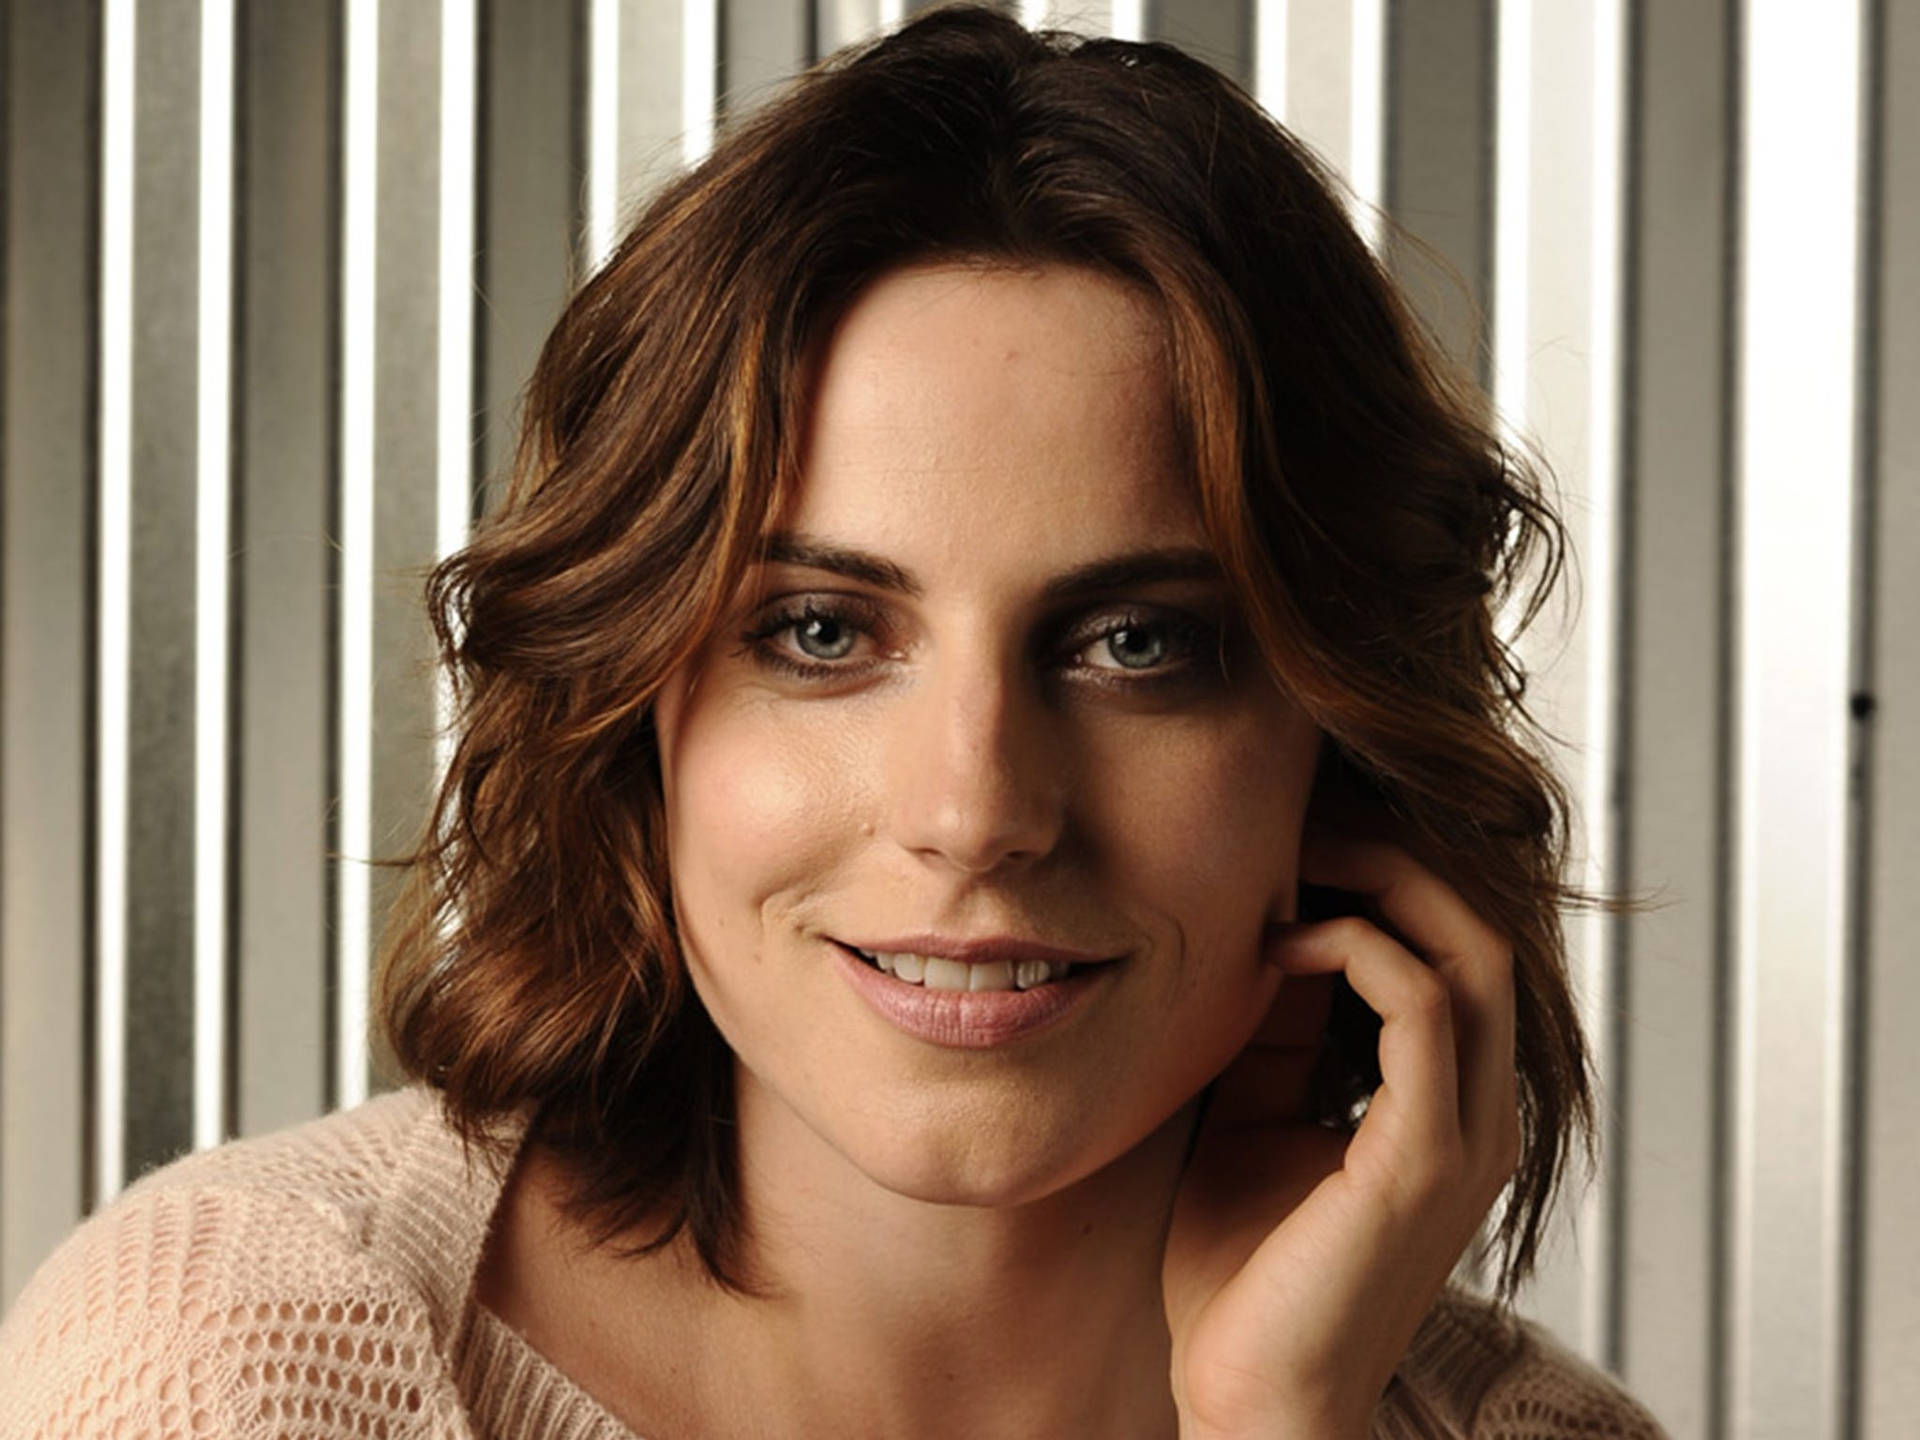 German Actress And Model Antje Traue